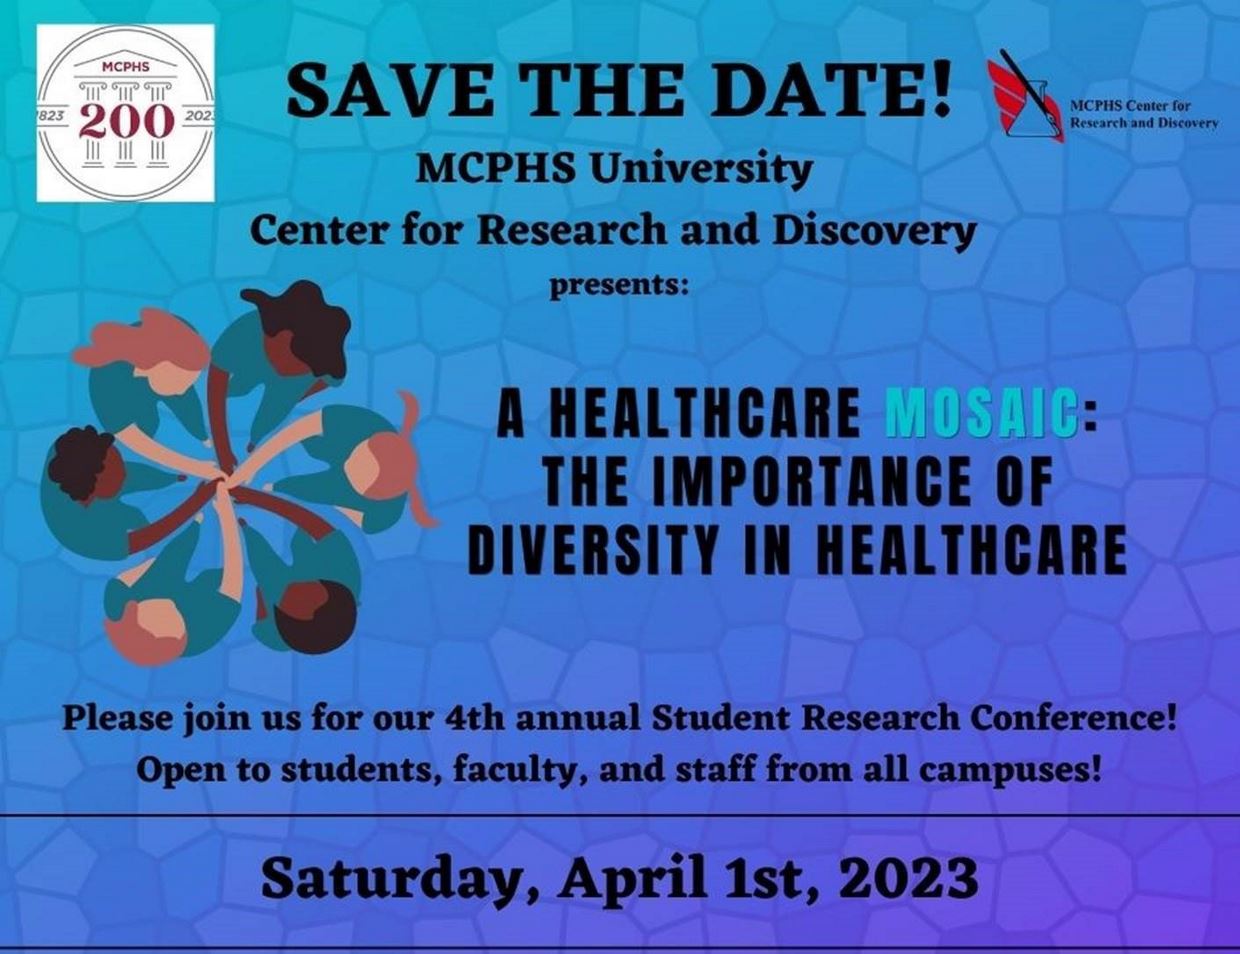 A flyer inviting the MCPHS Community to the Fourth Annual Student Research Conference on Saturday, April 1st on the Boston campus.